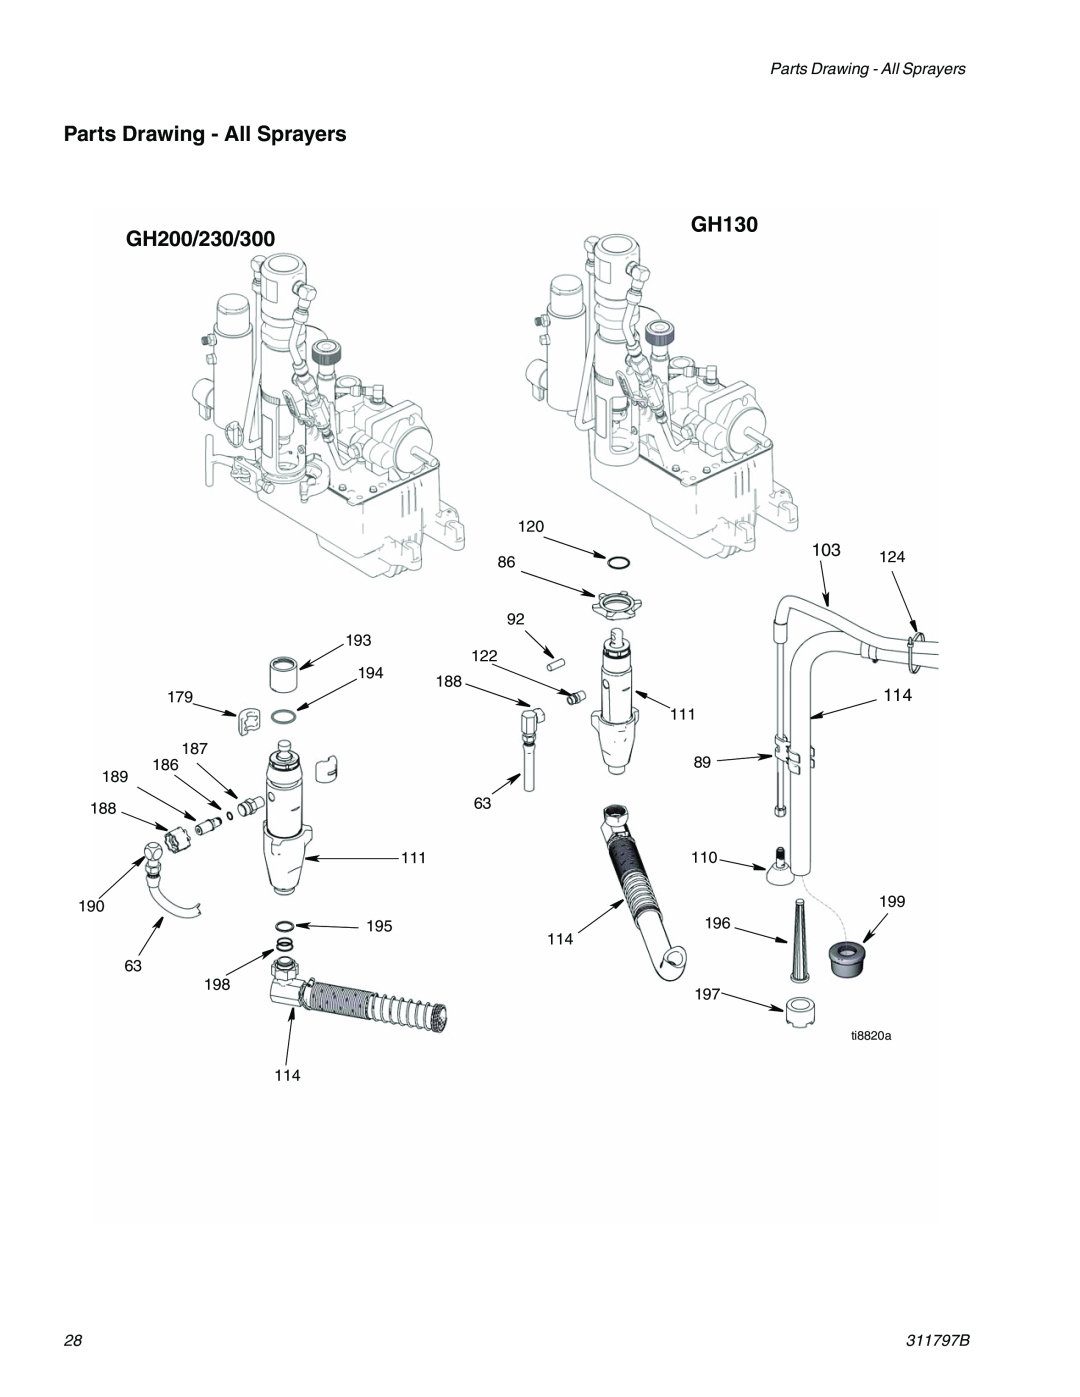 Uniden GH 230, GH 200, GH 130, GH 300 important safety instructions Parts Drawing - All Sprayers GH200/230/300, GH130, ti8820a 